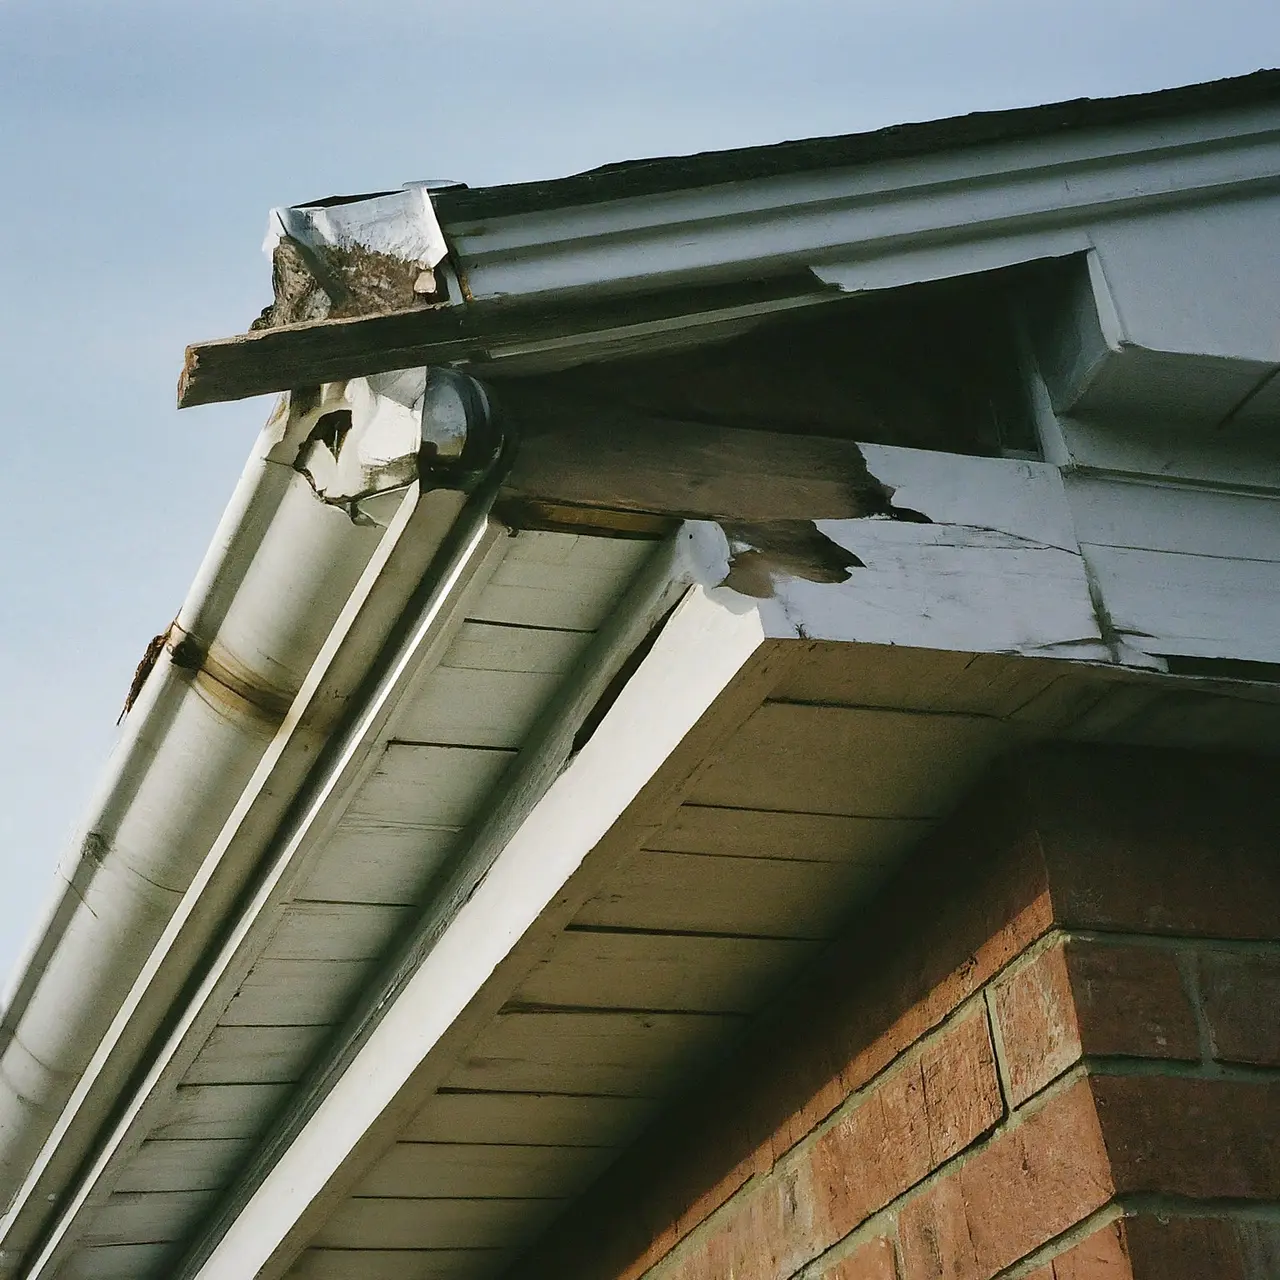 A damaged soffit on a residential home exterior. 35mm stock photo